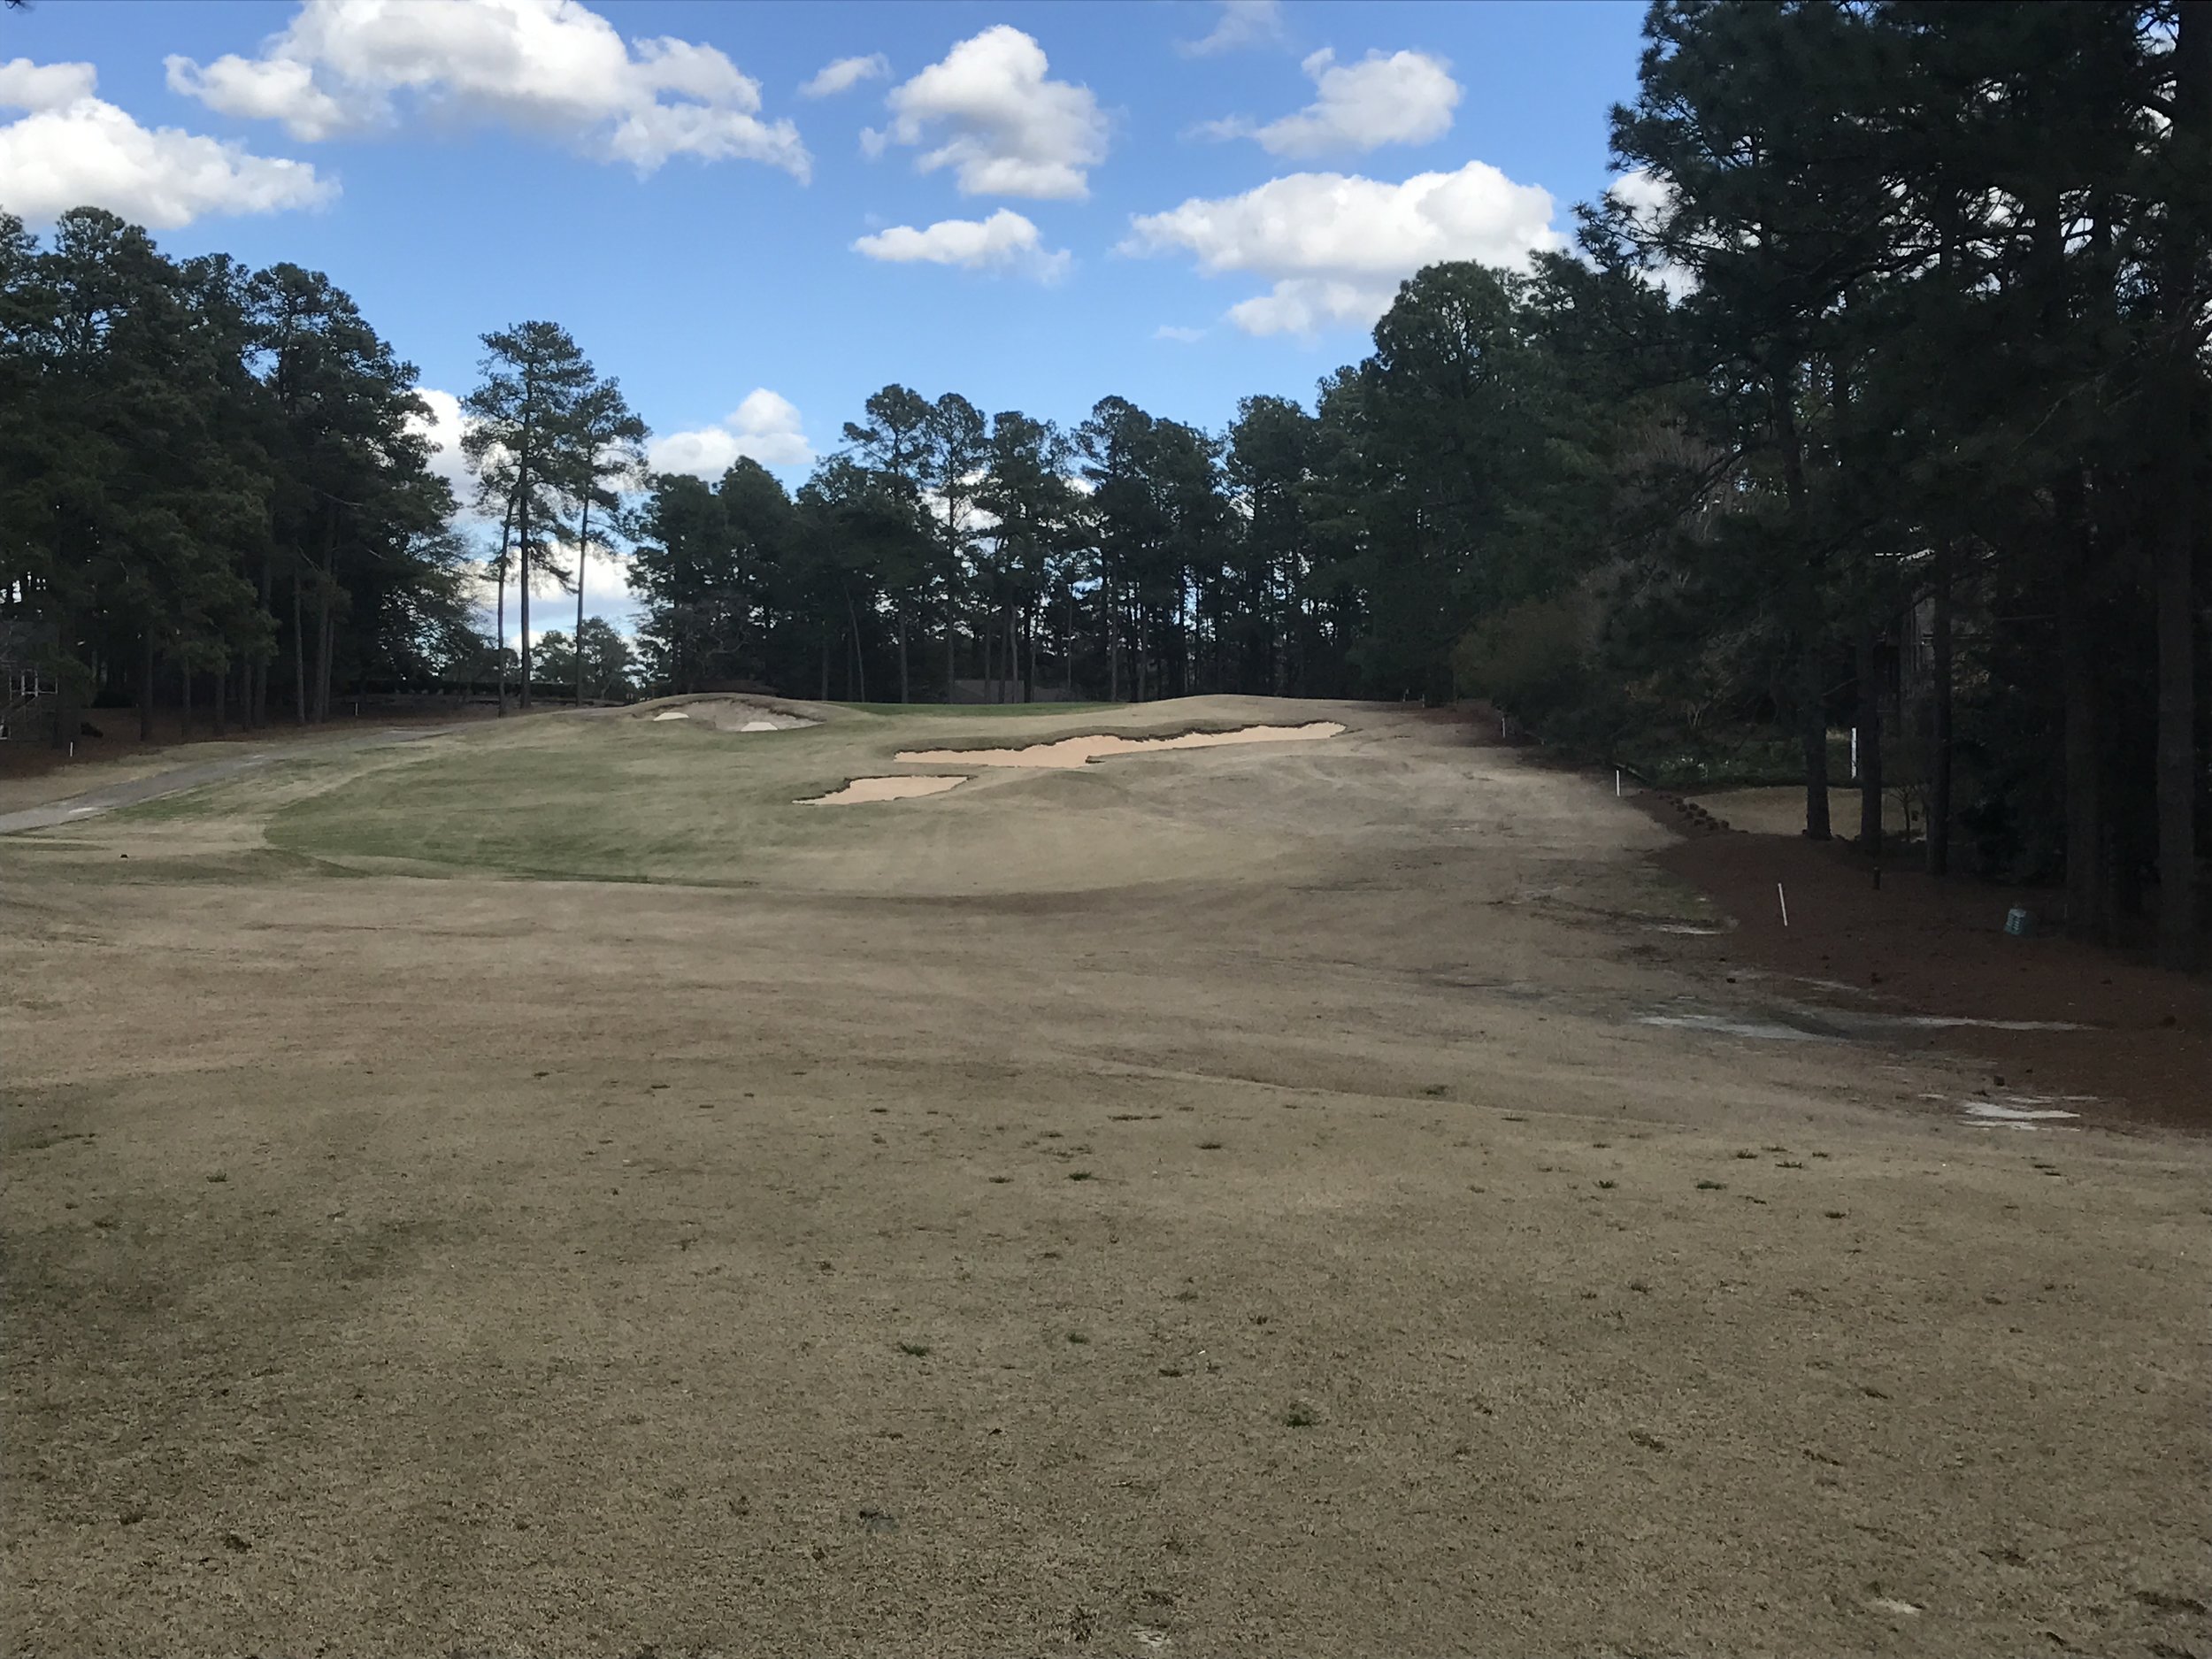  restored bunkers on par 3 14th hole on course 3 